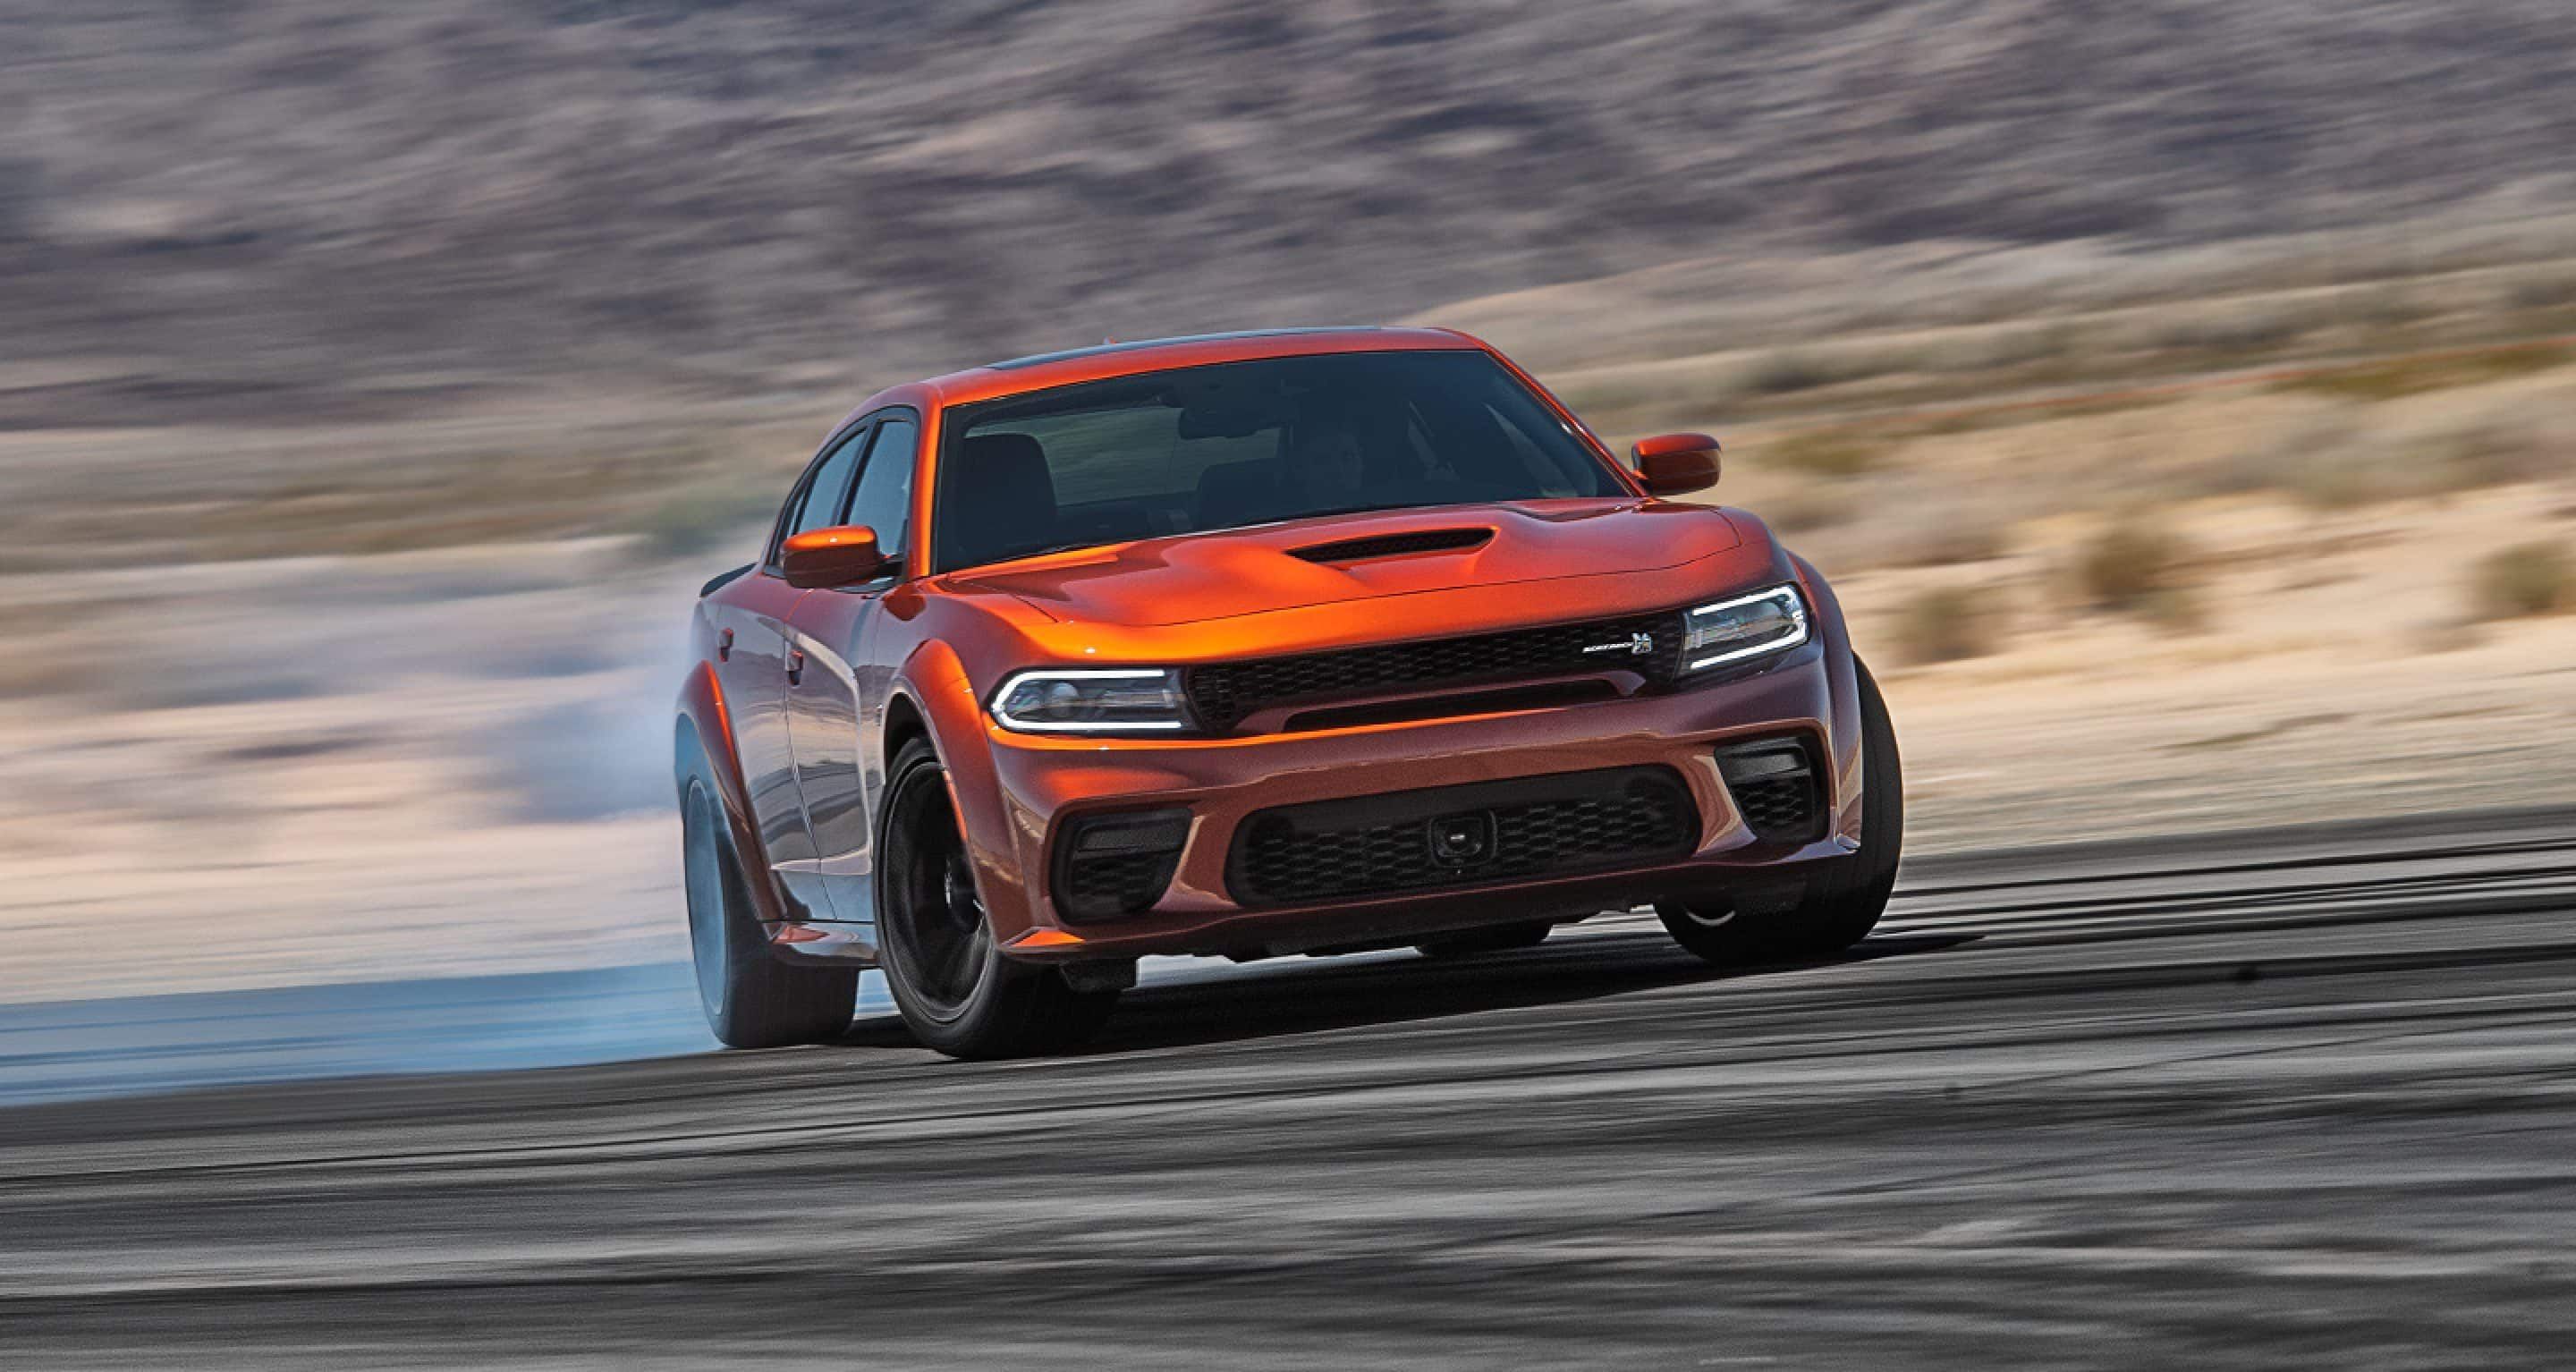 The 2022 Dodge Charger SRT Hellcat Redeye Widebody drifting on the track. 